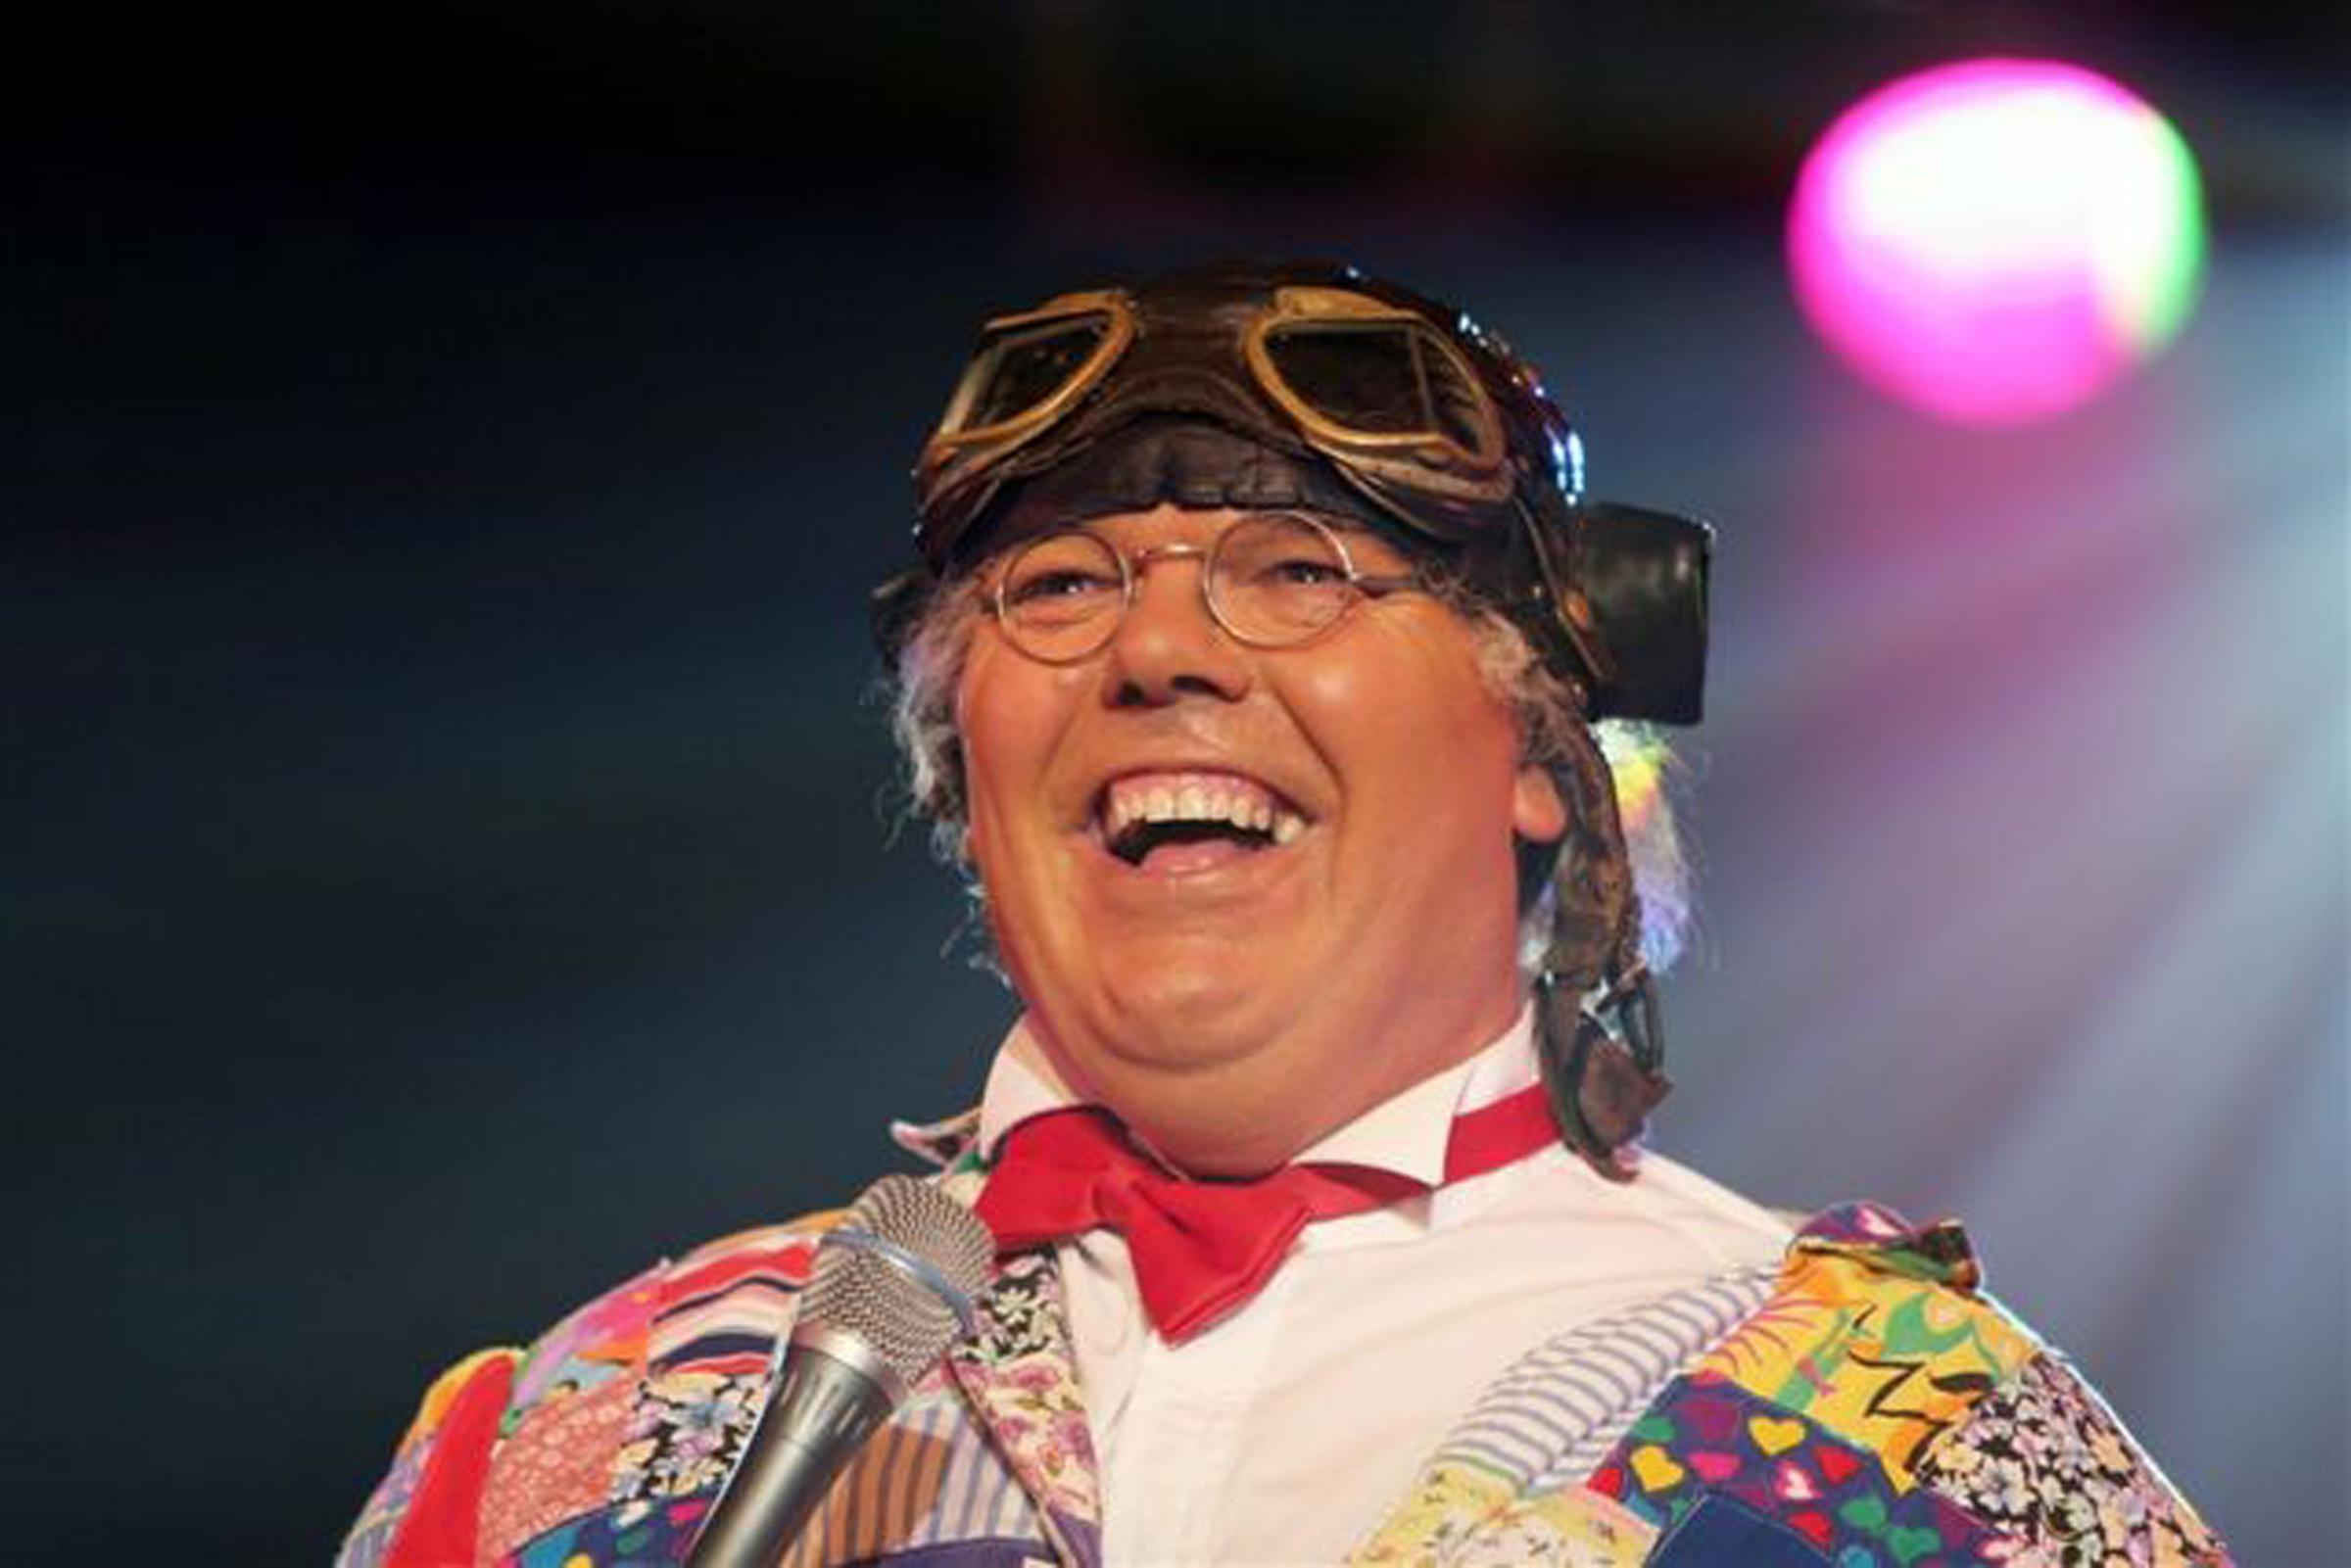 best of Singer Chubby brown